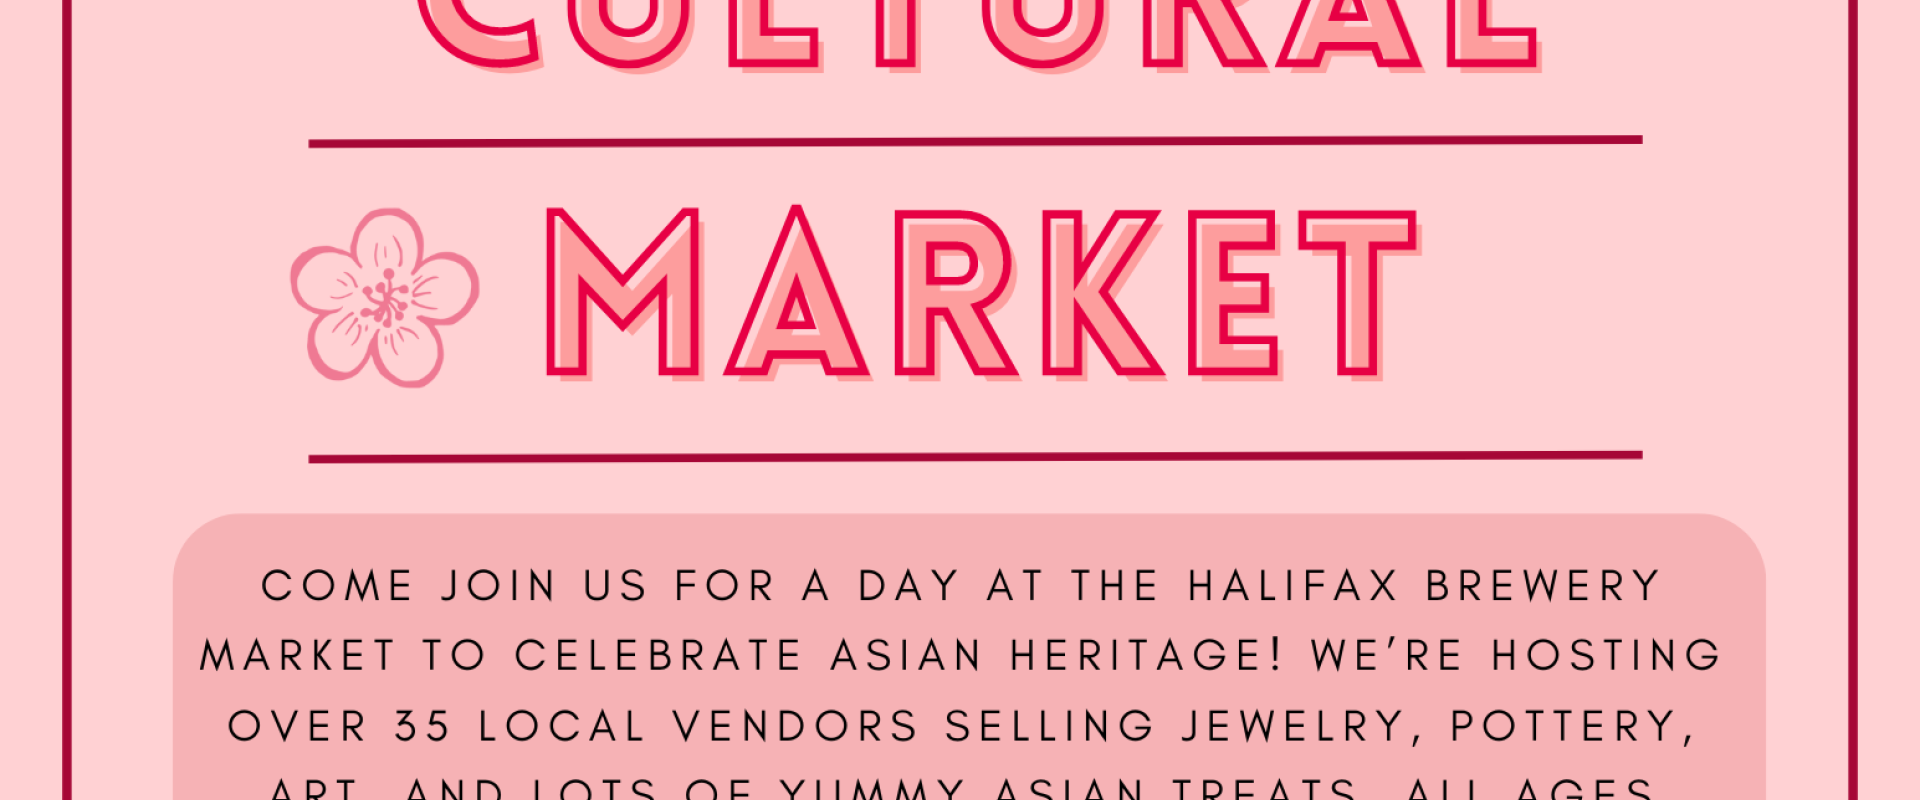 Asian Cultural Market. Come join us for a day at the Halifax Brewery Market to celebrate Asian Heritage! We’re hosting over 35 local vendors selling jewelry, pottery, art, and lots of yummy Asian treats. All ages workshops hosted by Dalhousie Asian societies!